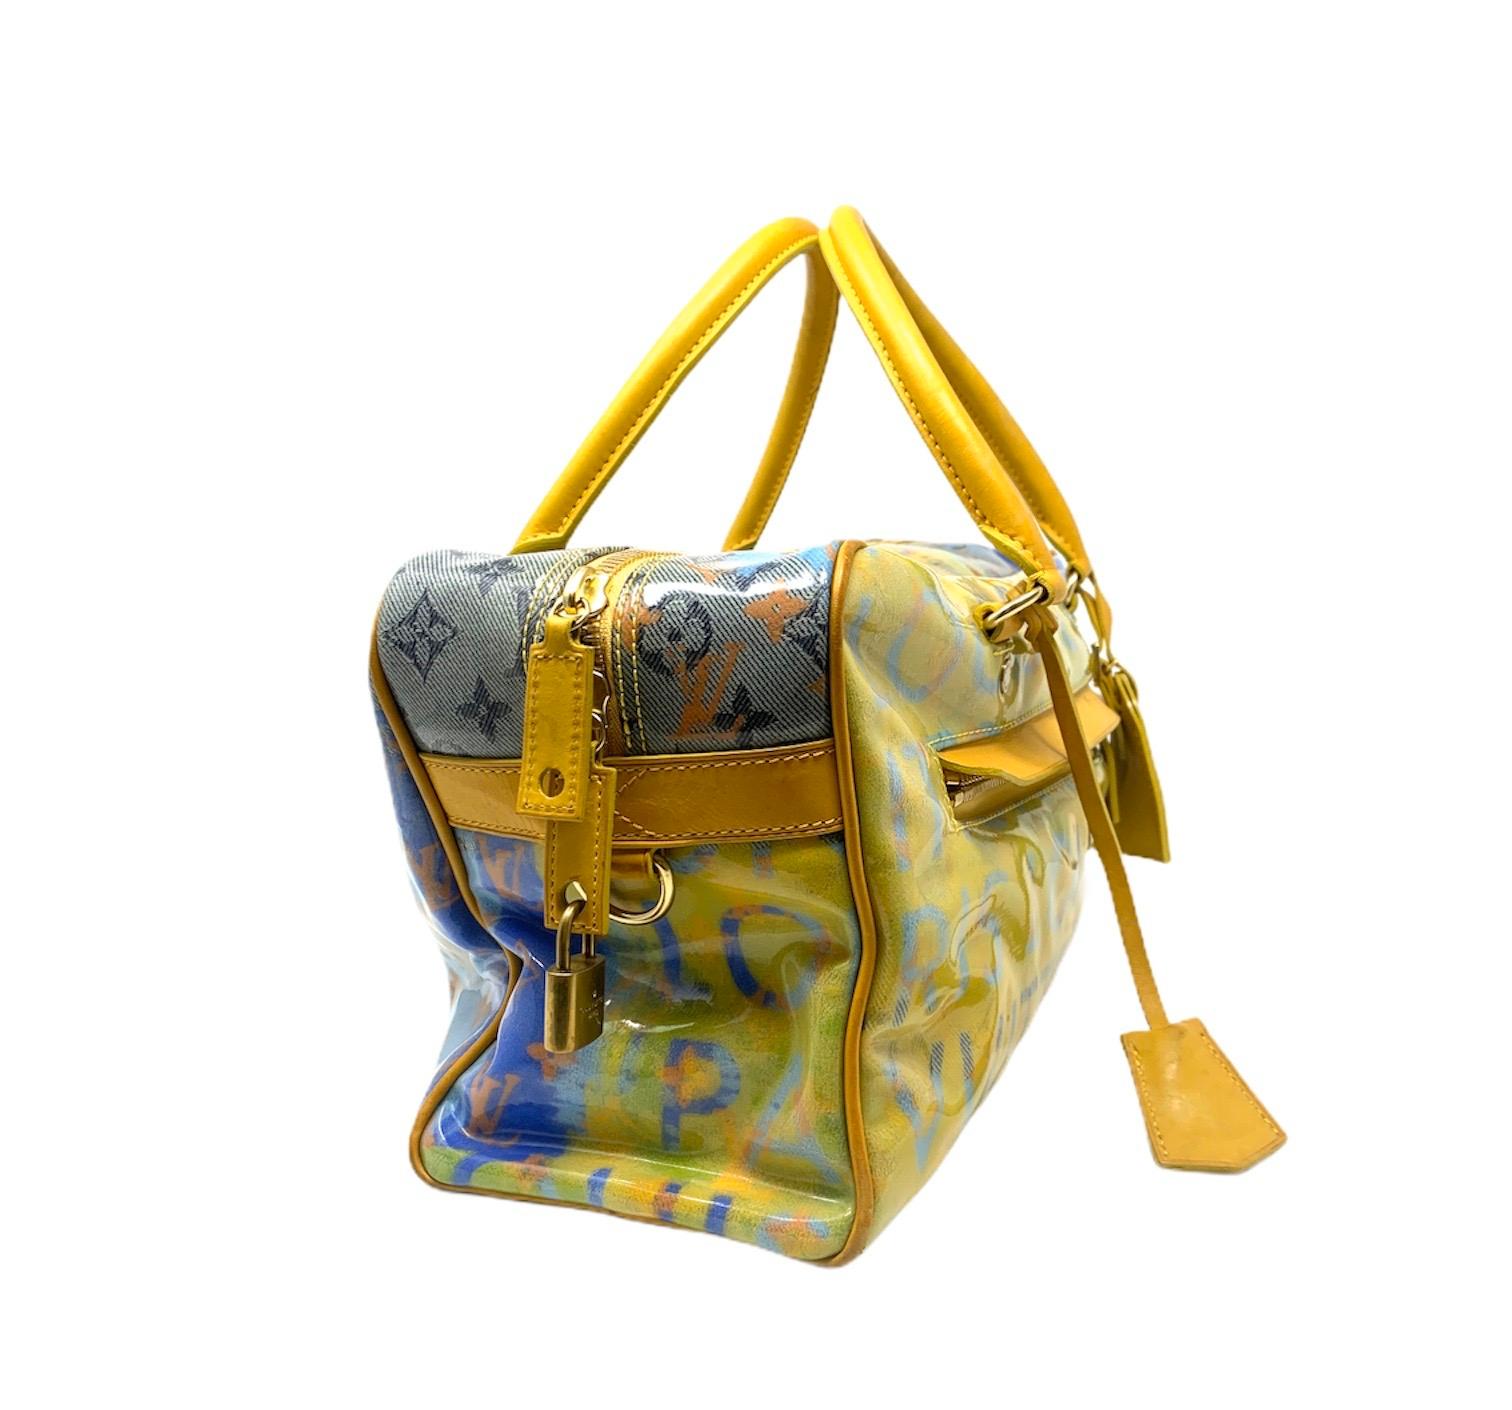 richard prince x louis vuitton bag from marc jacob's 2008 collection